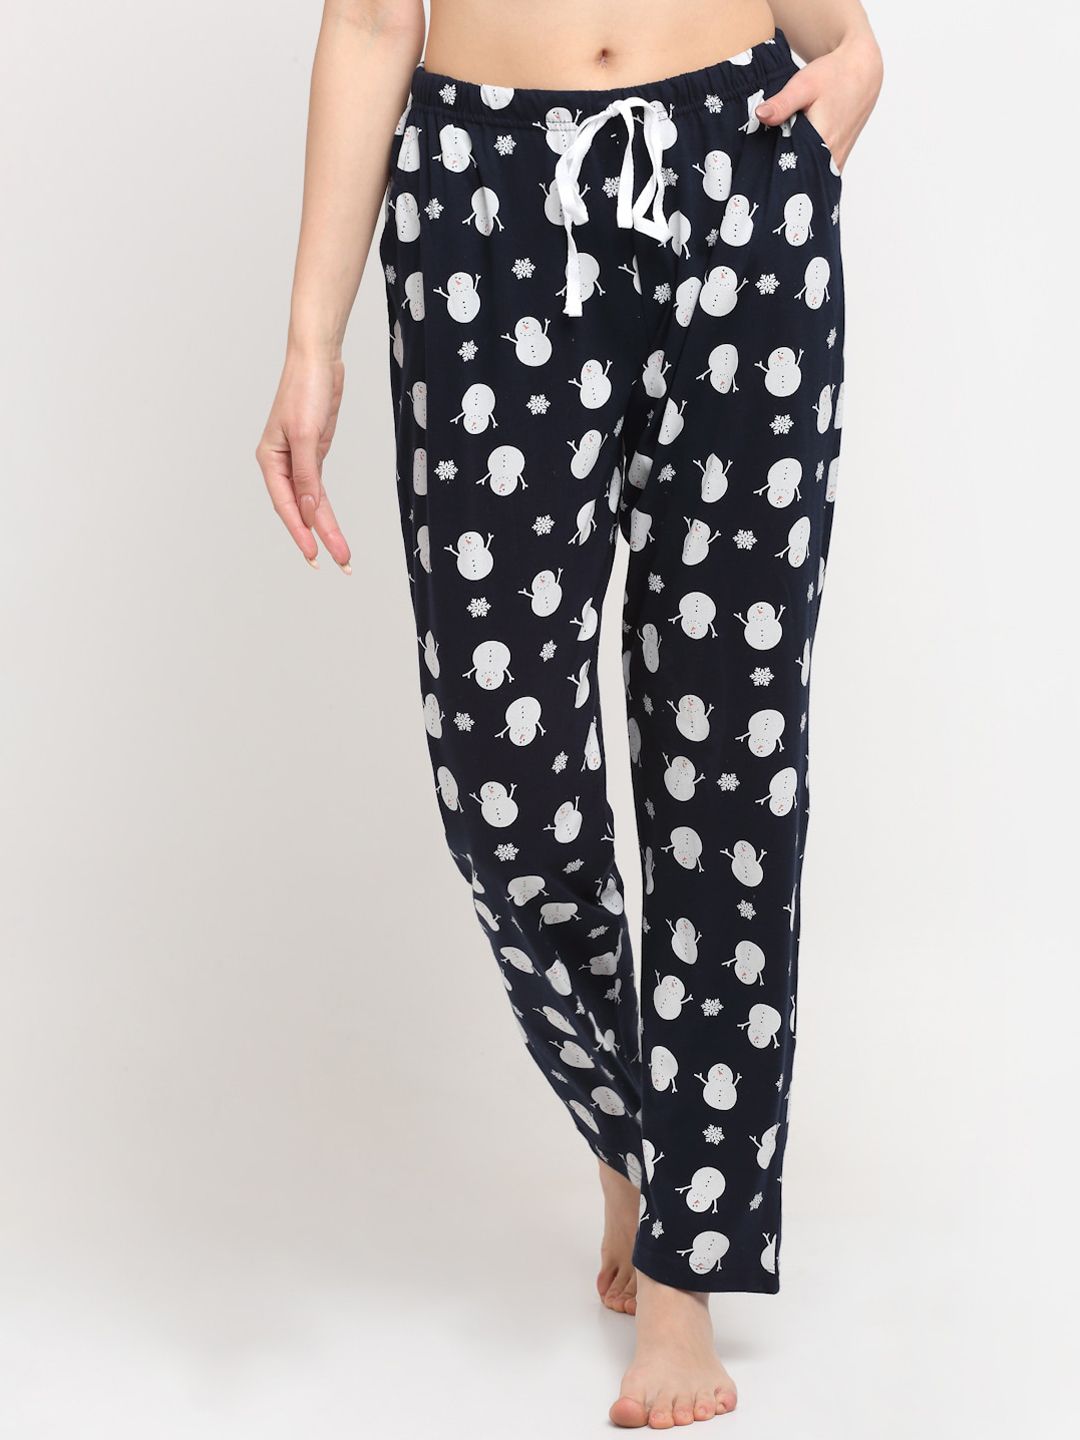 Kanvin Navy Blue Printed Cotton Lounge Pants Price in India